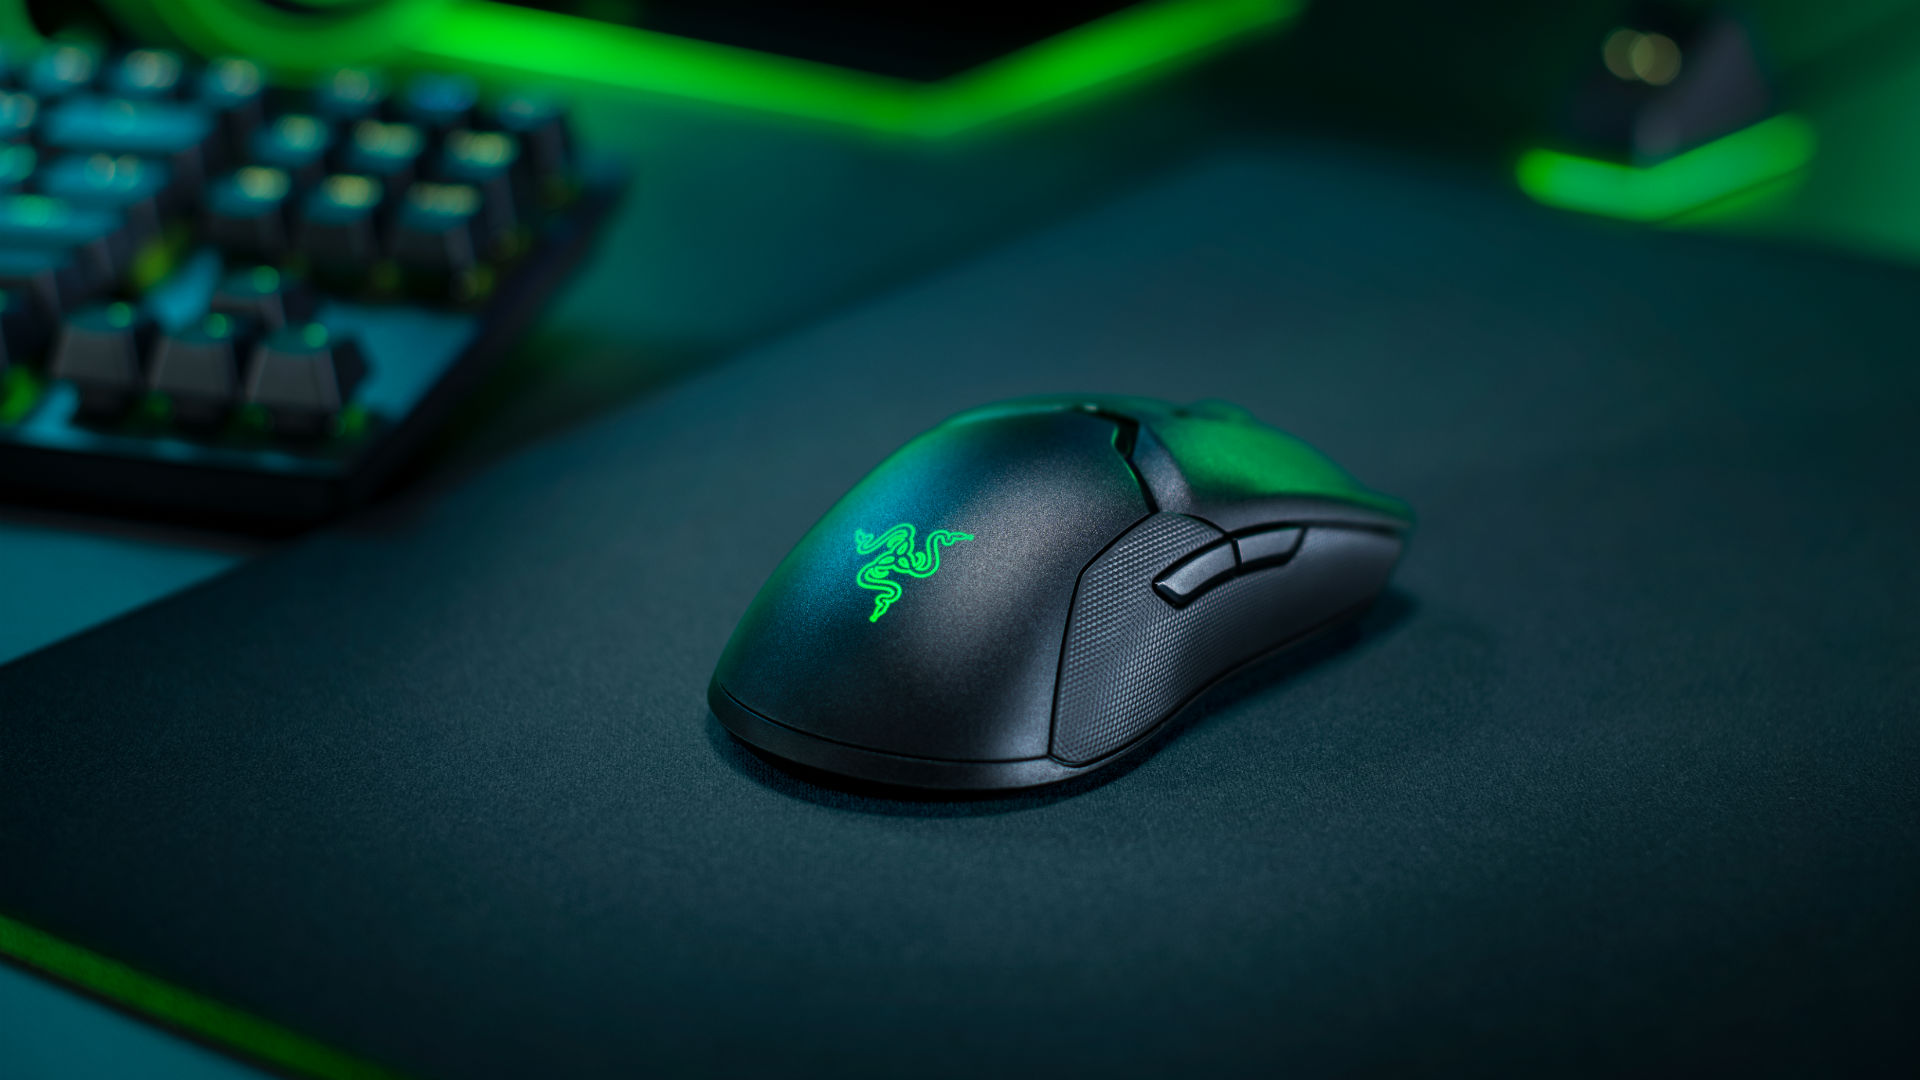 Razer Viper Ultimate wireless gaming mouse review | PC Gamer